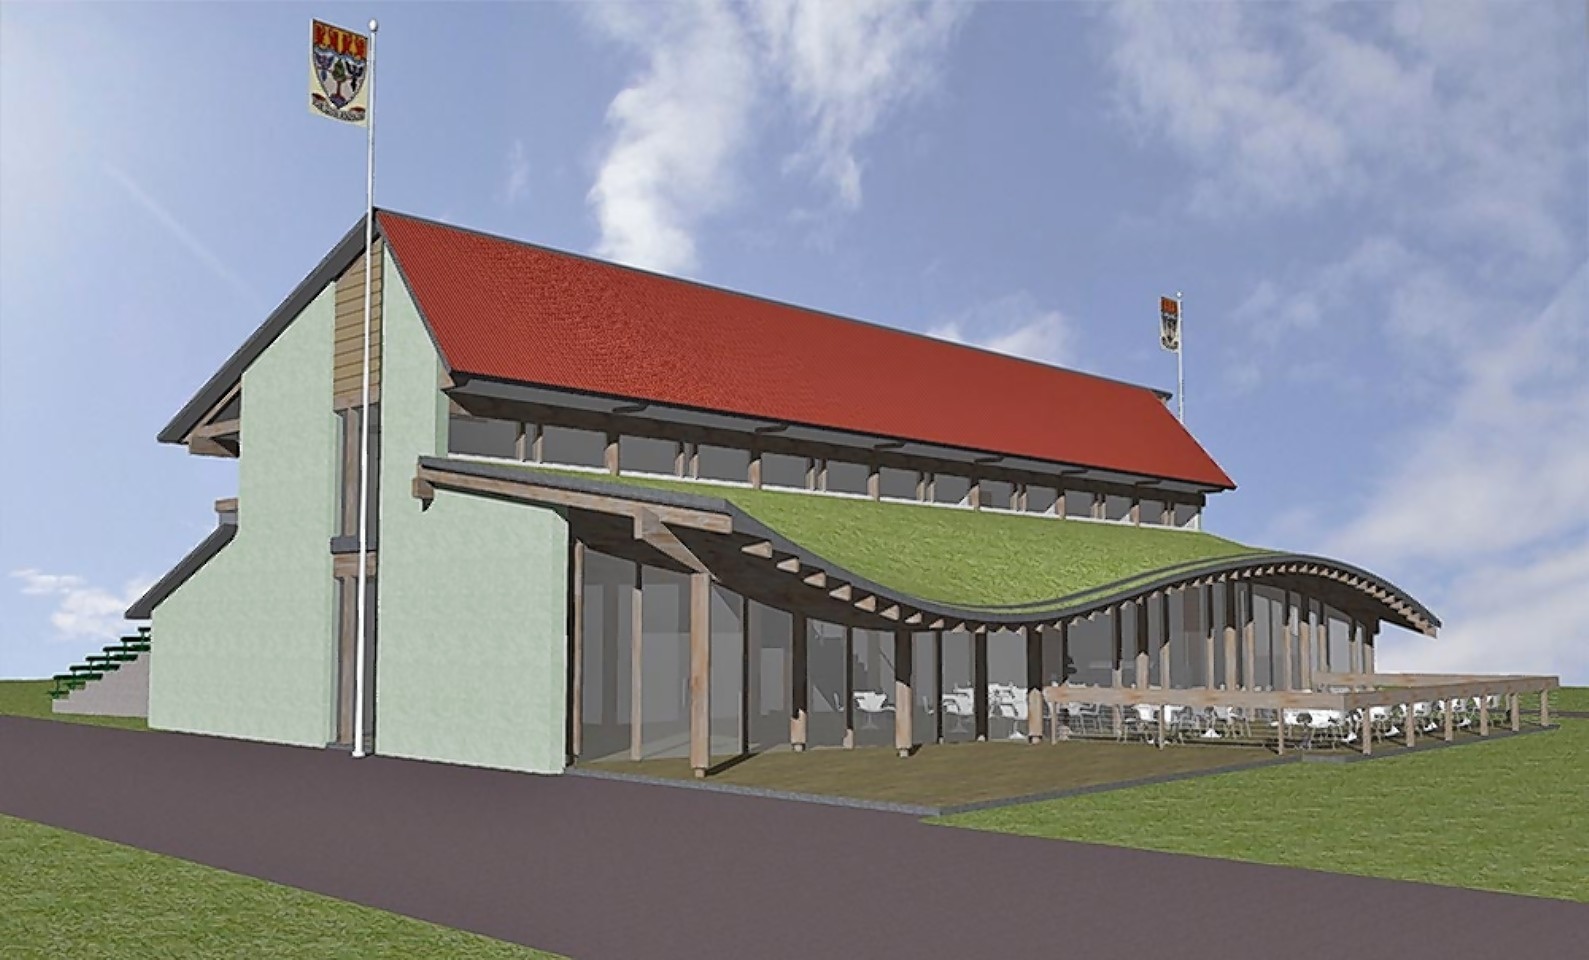 Artist impression of the new Braemar Highland Games Centre